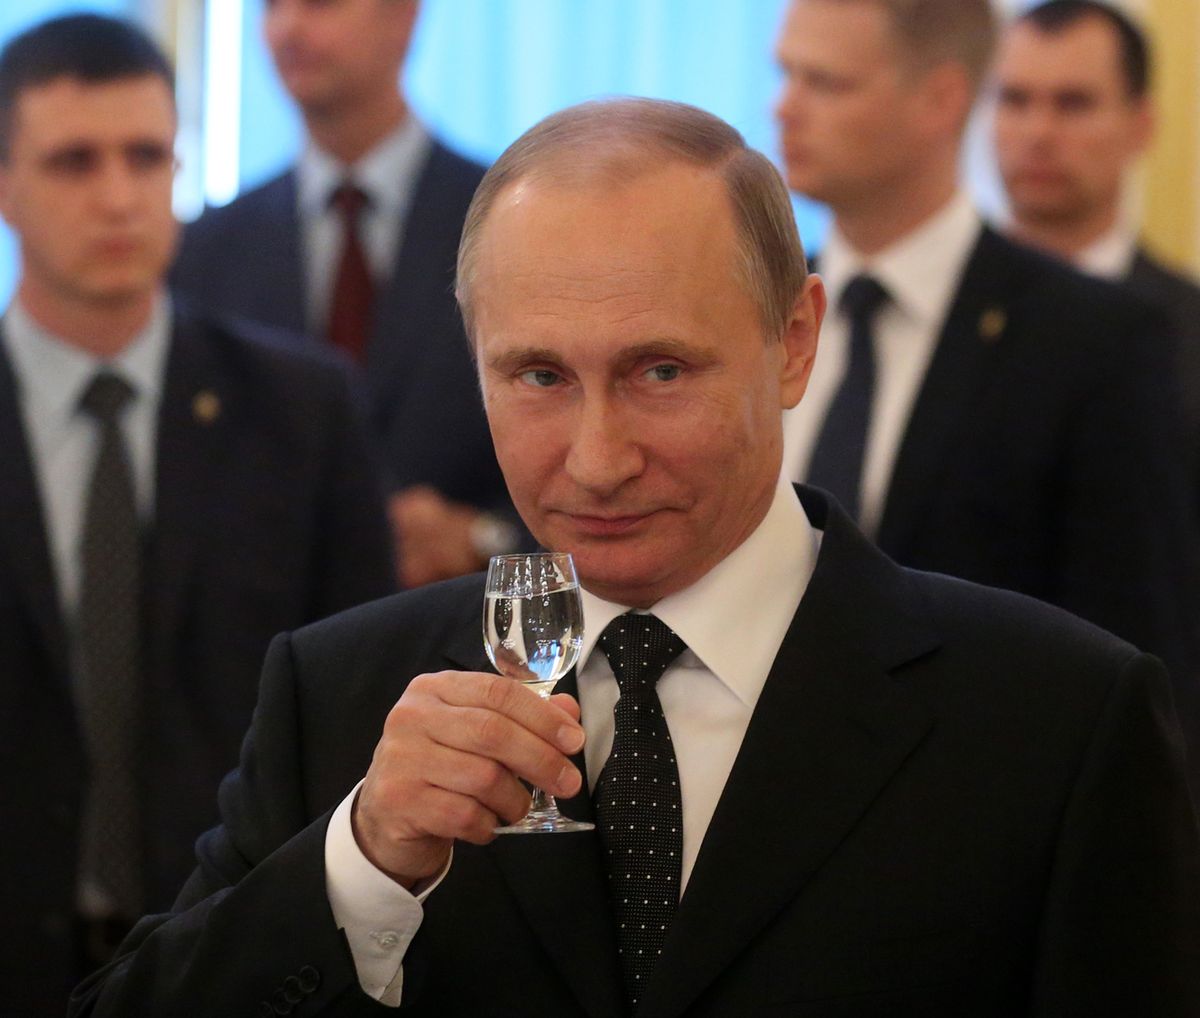 MOSCOW, RUSSIA - JUNE 28: (RUSSIA OUT) Russian President Vladimir Putin toasts holding a glass of vodka during the reception for graduates of military academies and universtities at the Grand Kremlin Palace on June 28, 2016 in Moscow, Russia. 